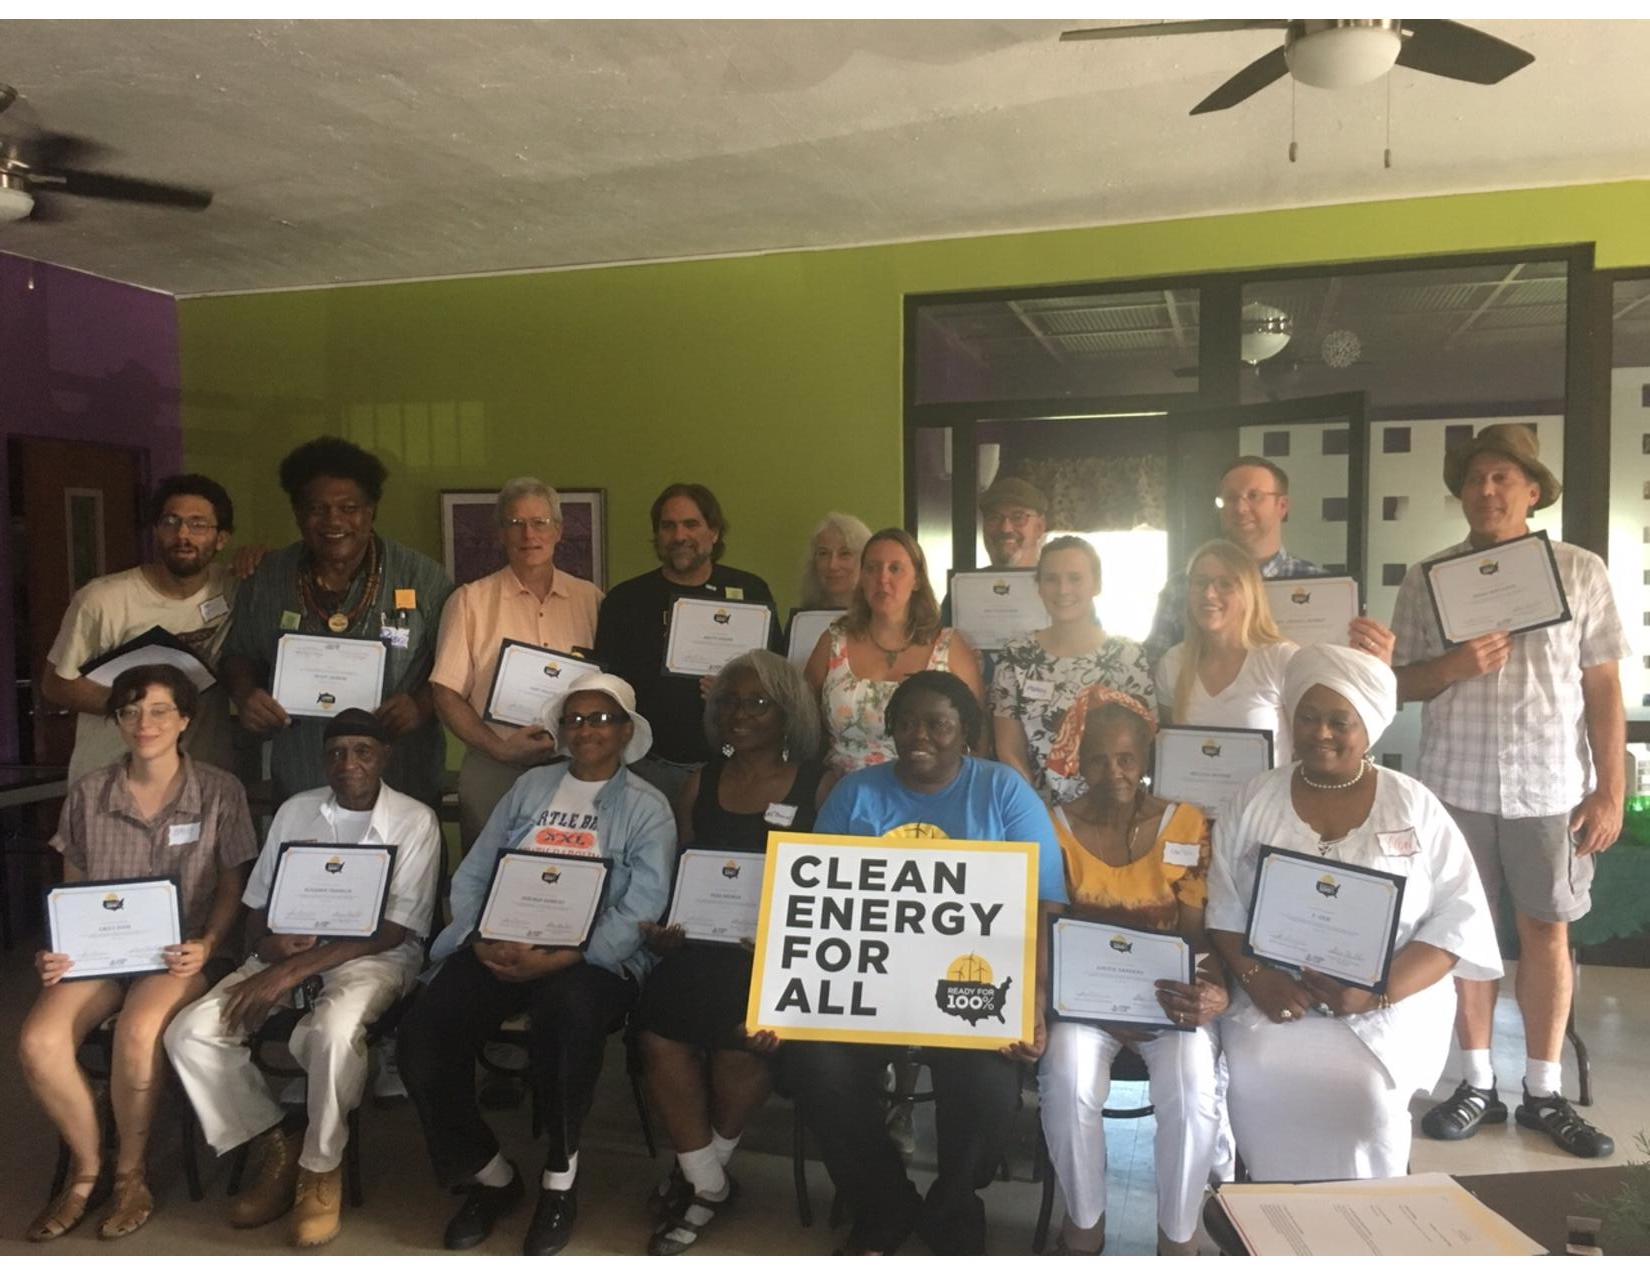 Participants of a community dialogue on clean energy in Cleveland, OH